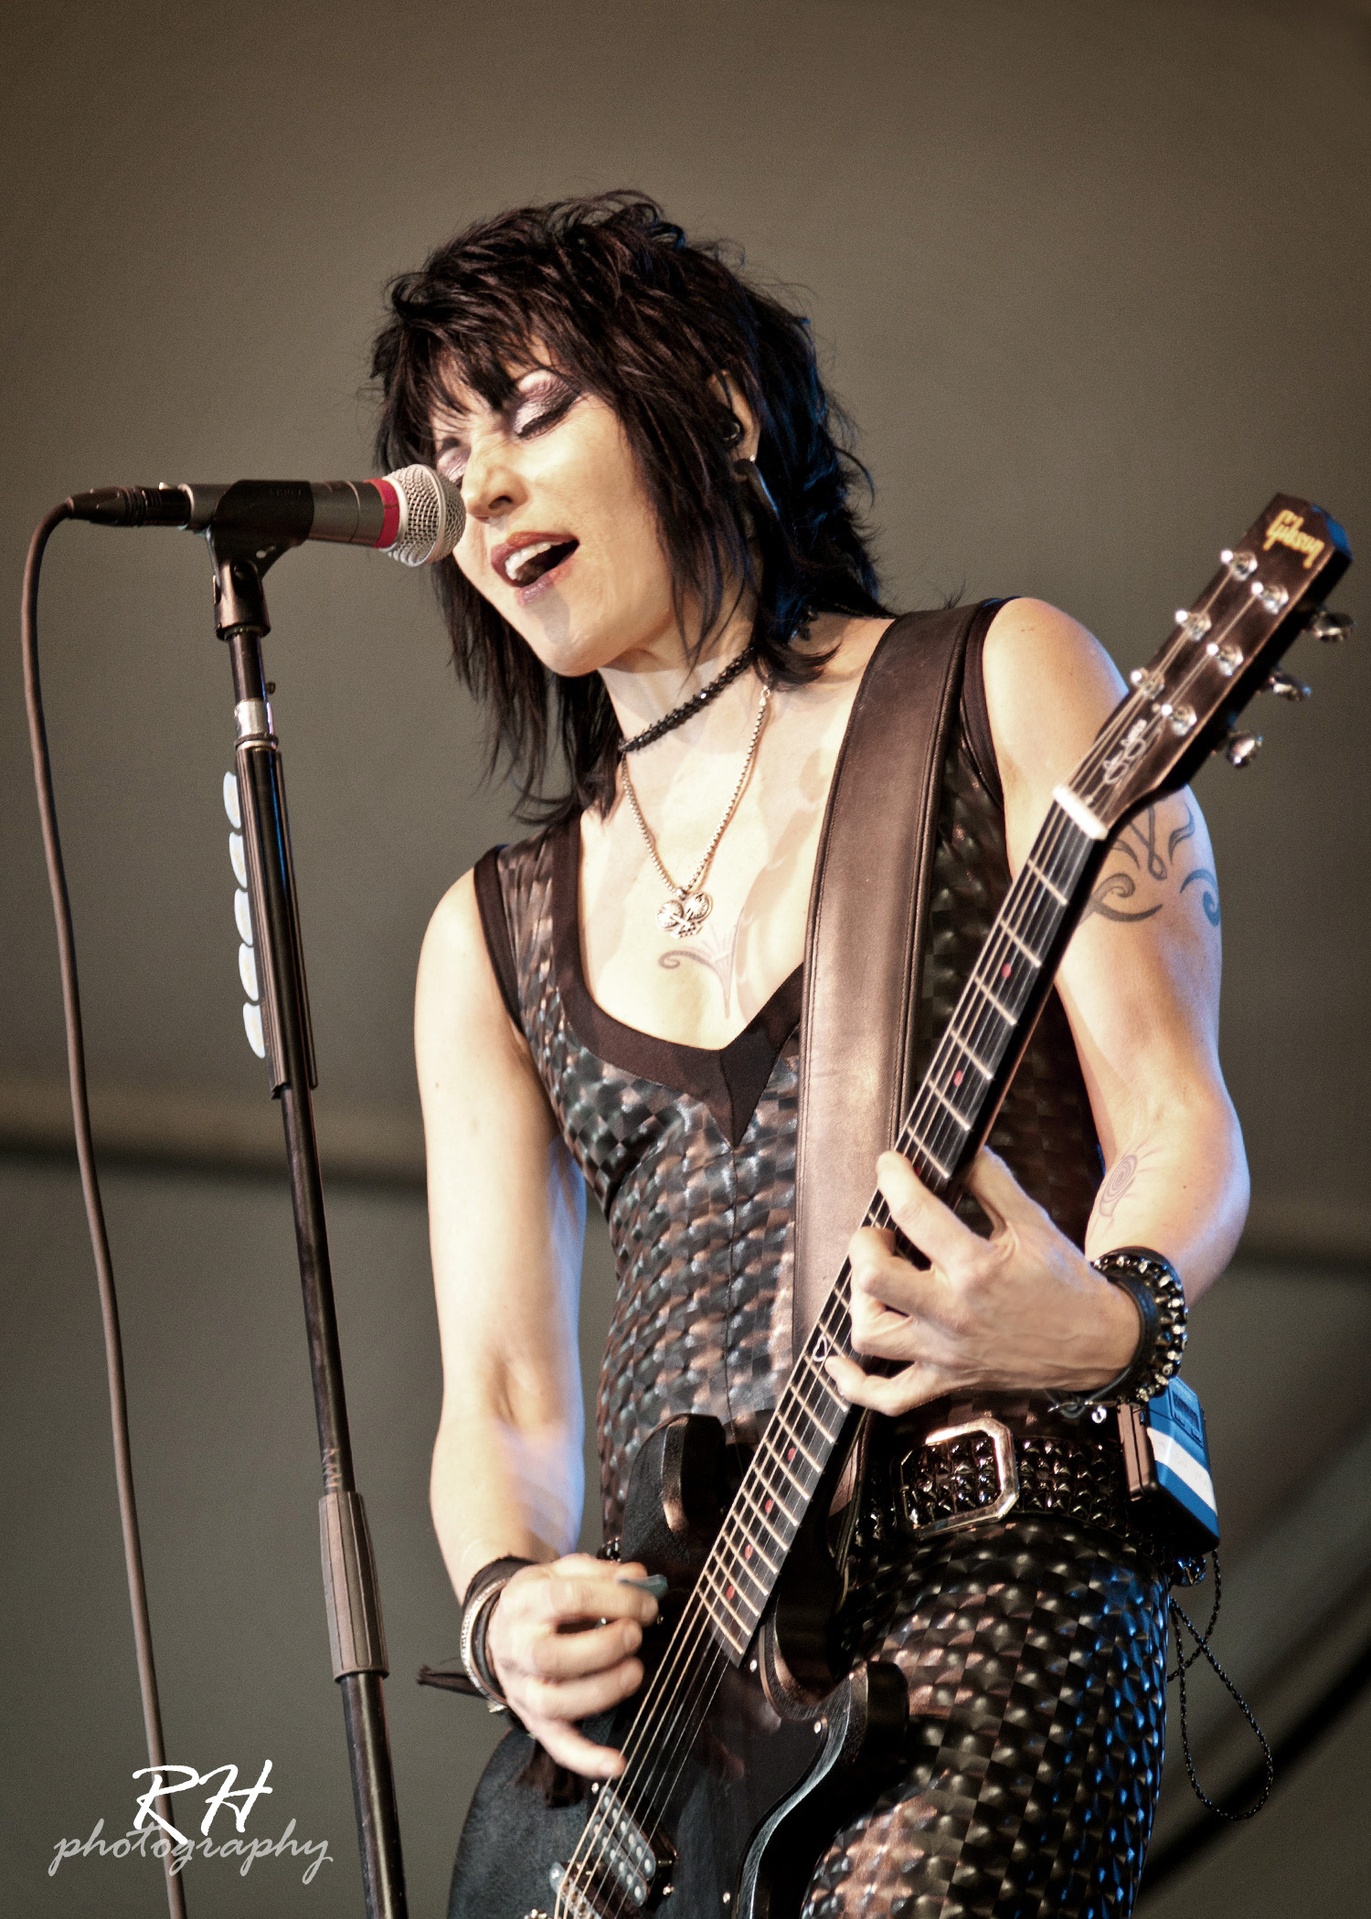 Joan Jett And The Blackhearts Backgrounds, Compatible - PC, Mobile, Gadgets| 1371x1919 px